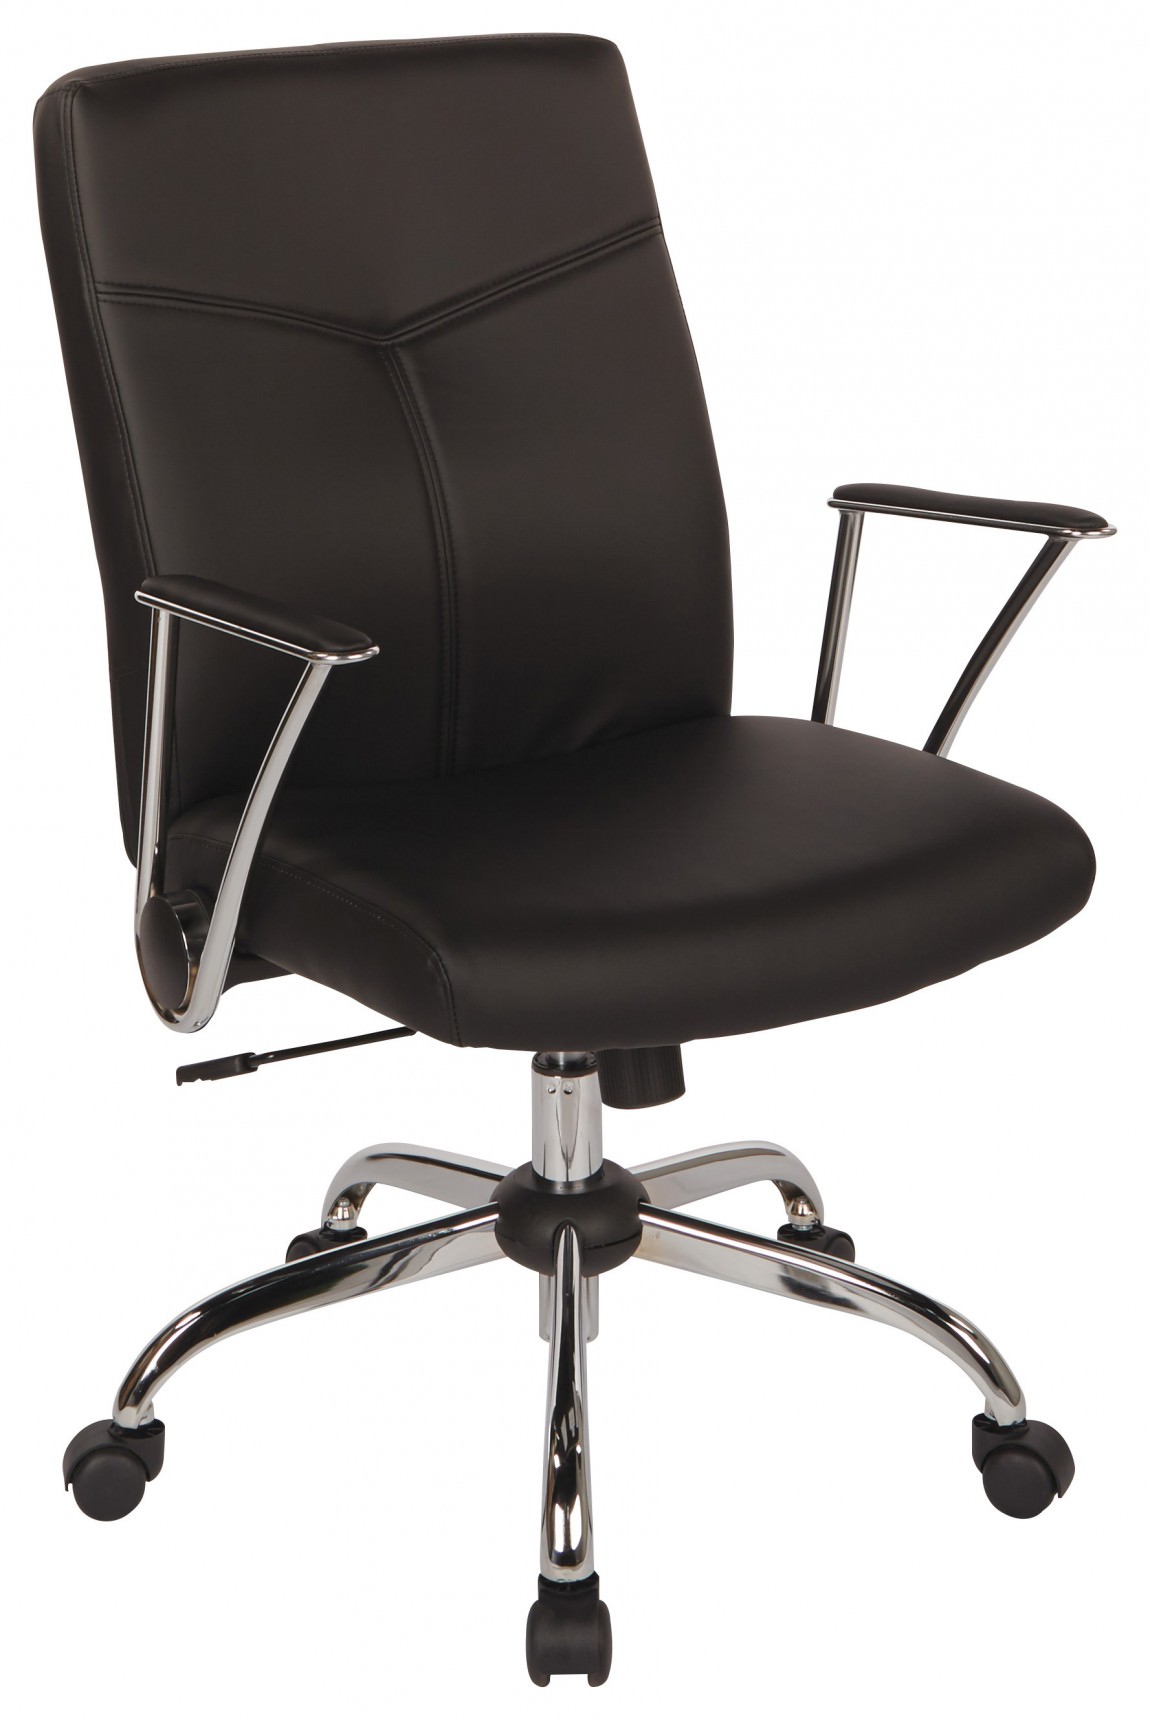 Mid Back Conference Room Chair with Flip Up Arms